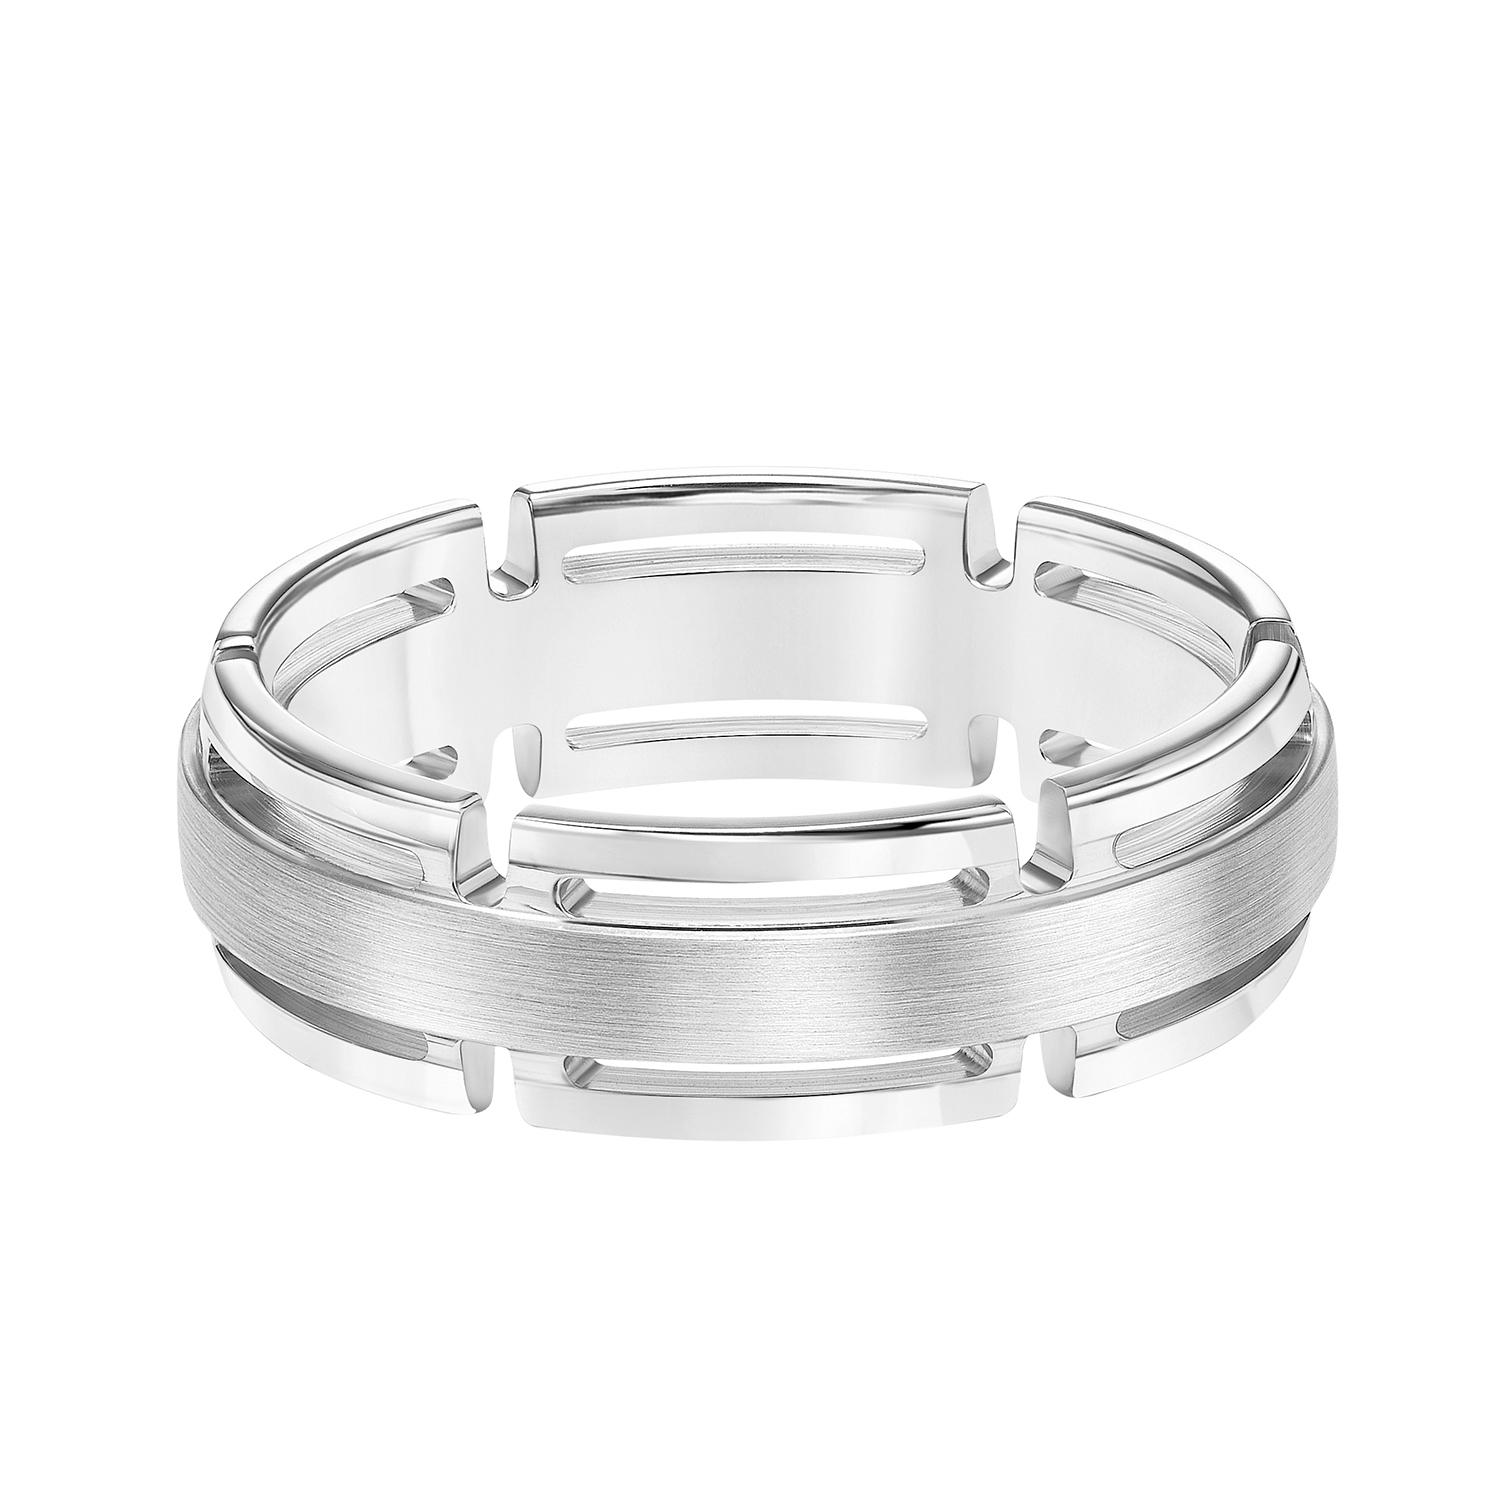 Gents 14K White Gold Wedding Band with Link Edge Design